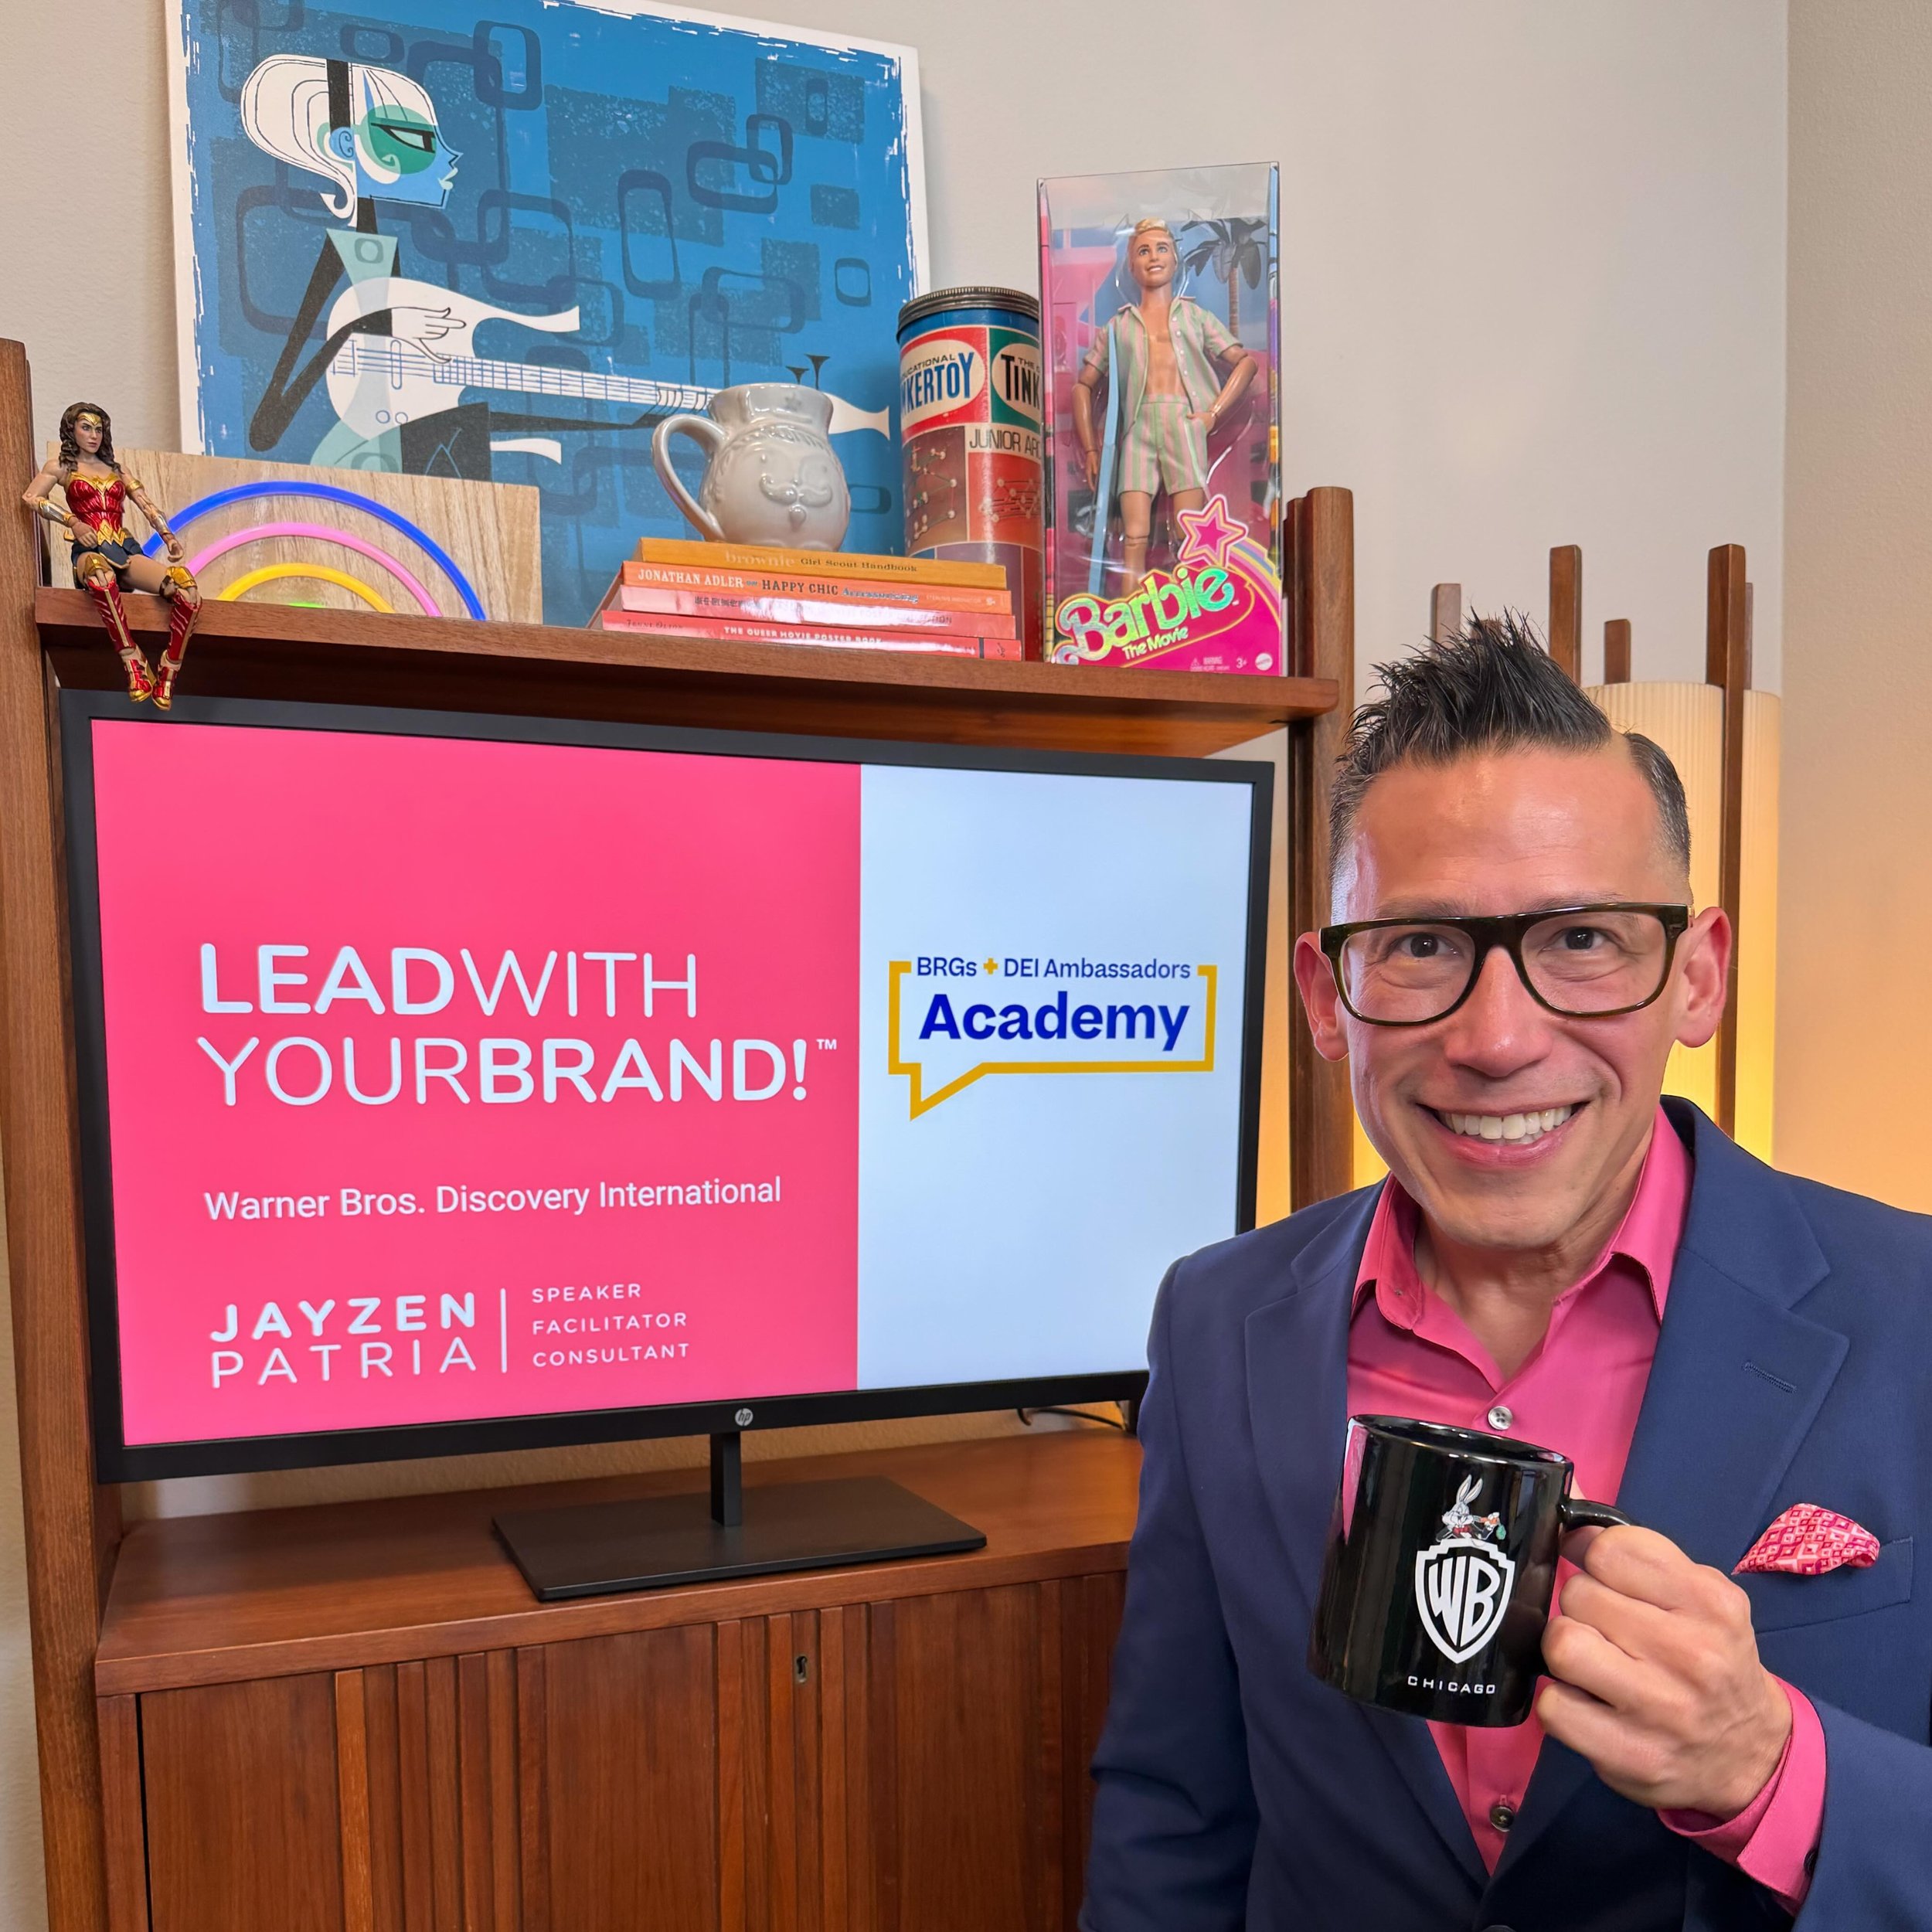 Last week, I had the honor of talking #LeadWithYourBrand at the Warner Bros. Discover BRG Academy! This program invests in the media company&rsquo;s global Business Resource Group leaders and DEI Ambassadors, equipping them with skills to advance the